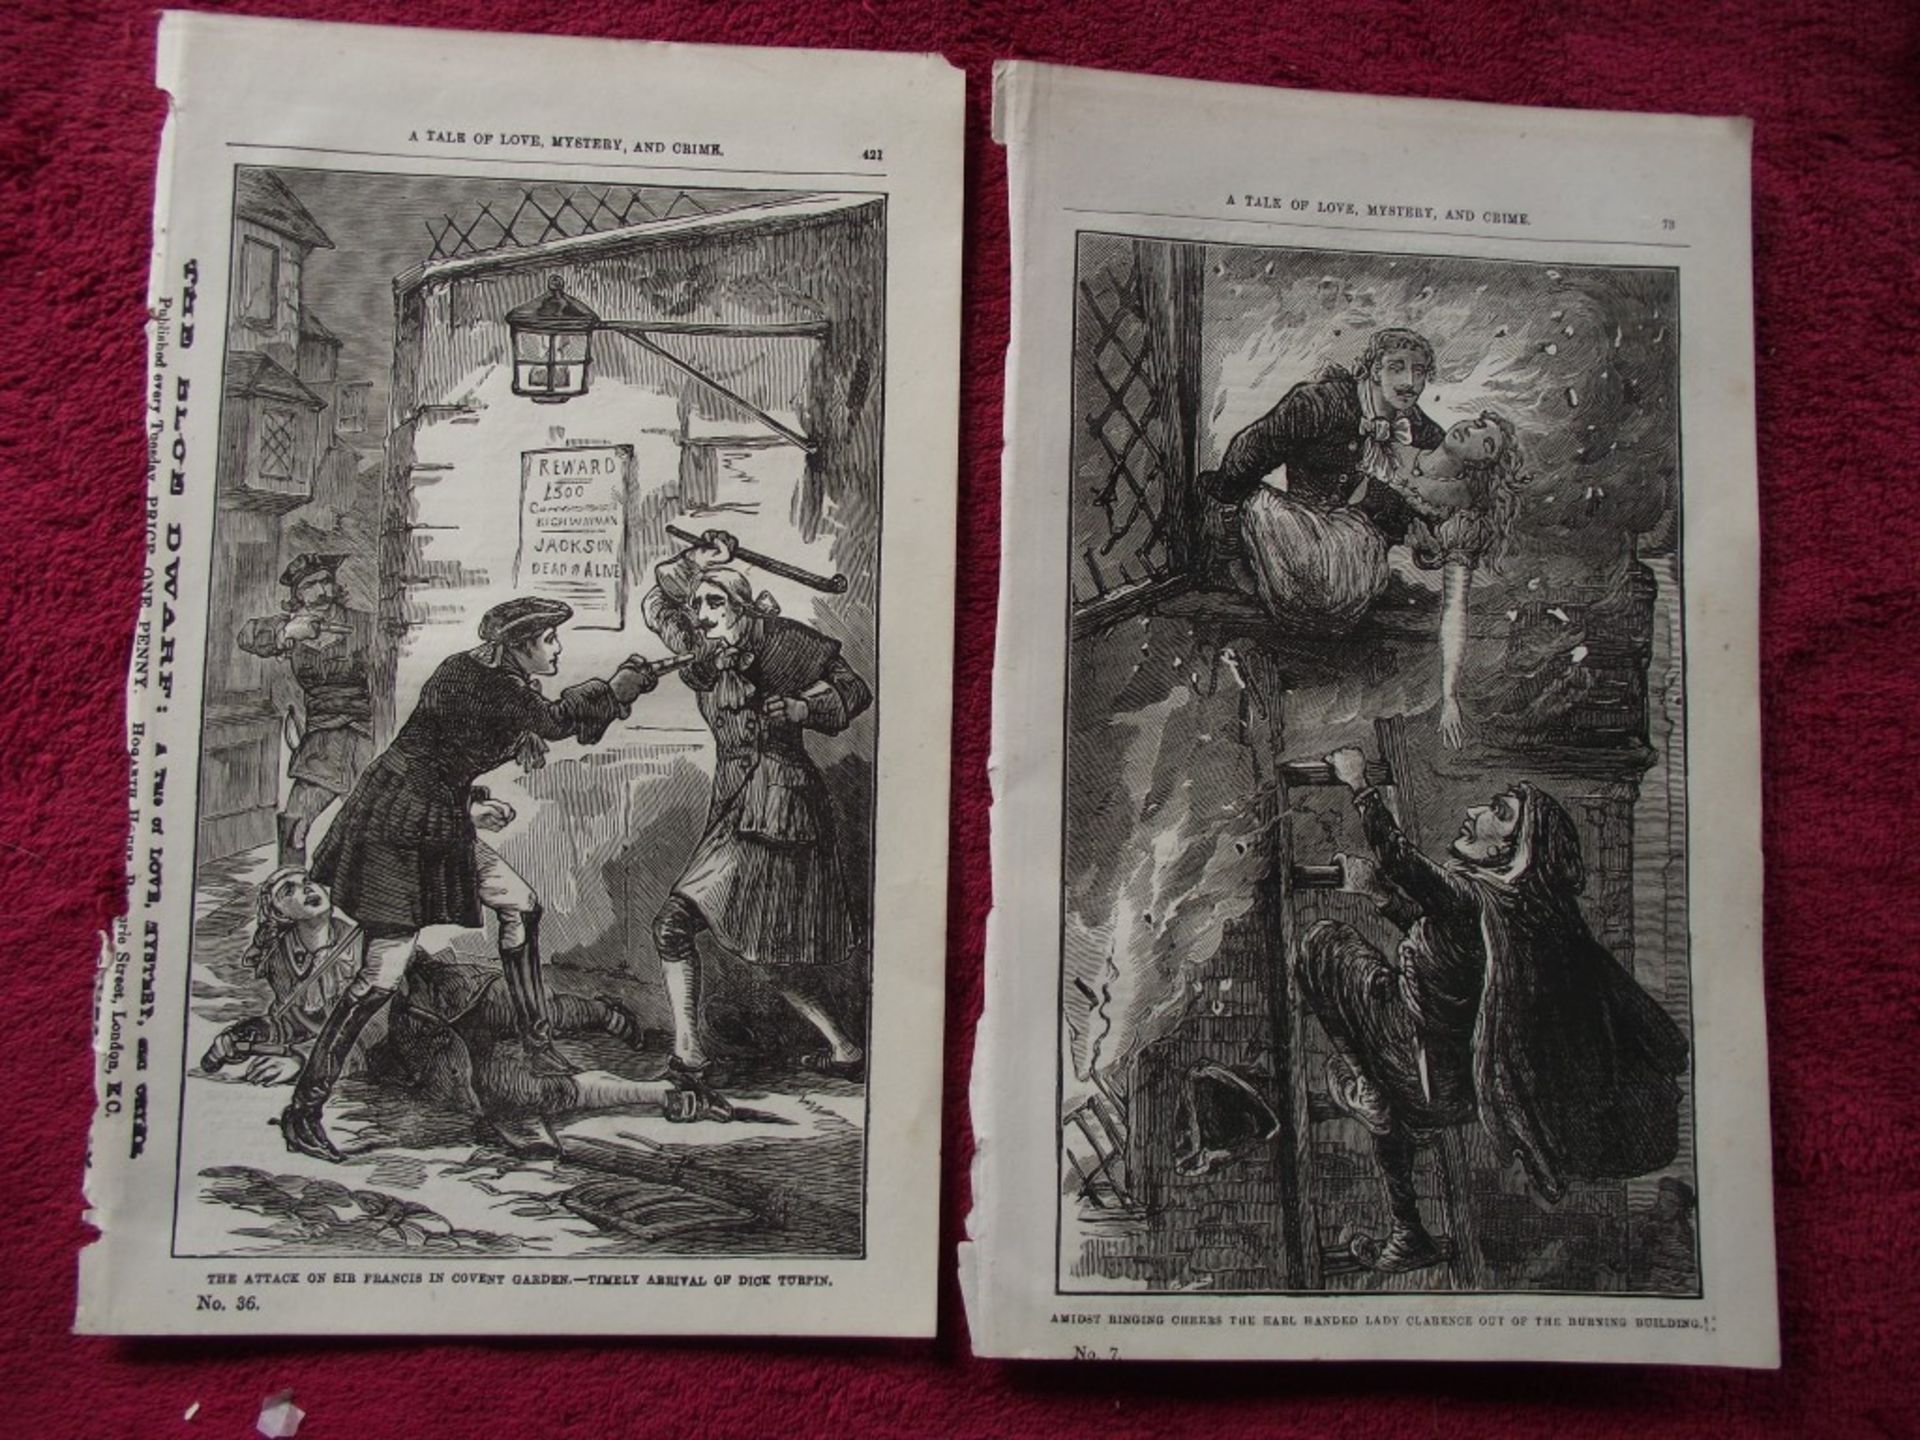 16 x Lithographic Prints From The Blue Dwarf - Percy B. St John - + 14 Prints - Circa 1880's - Image 29 of 39